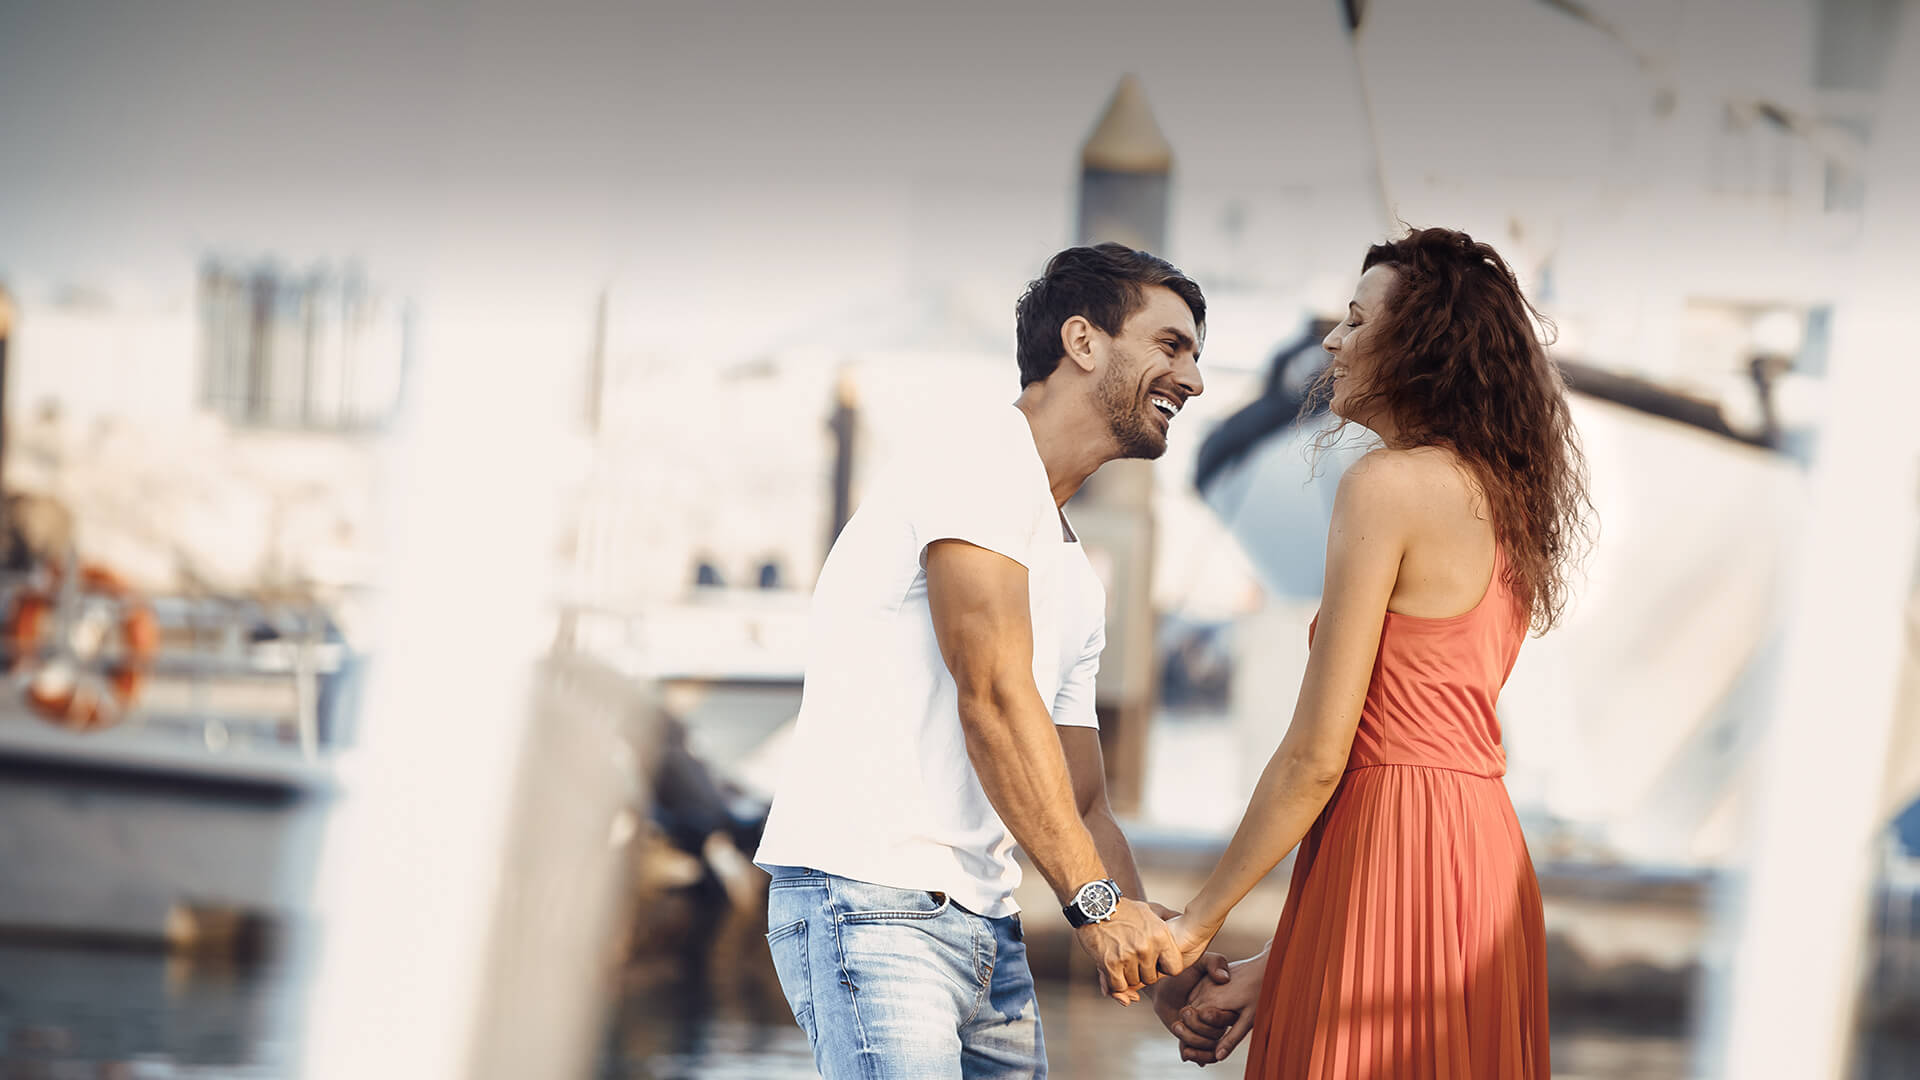 Arab dating symbolized by a man and woman holding hands and standing happily at the port